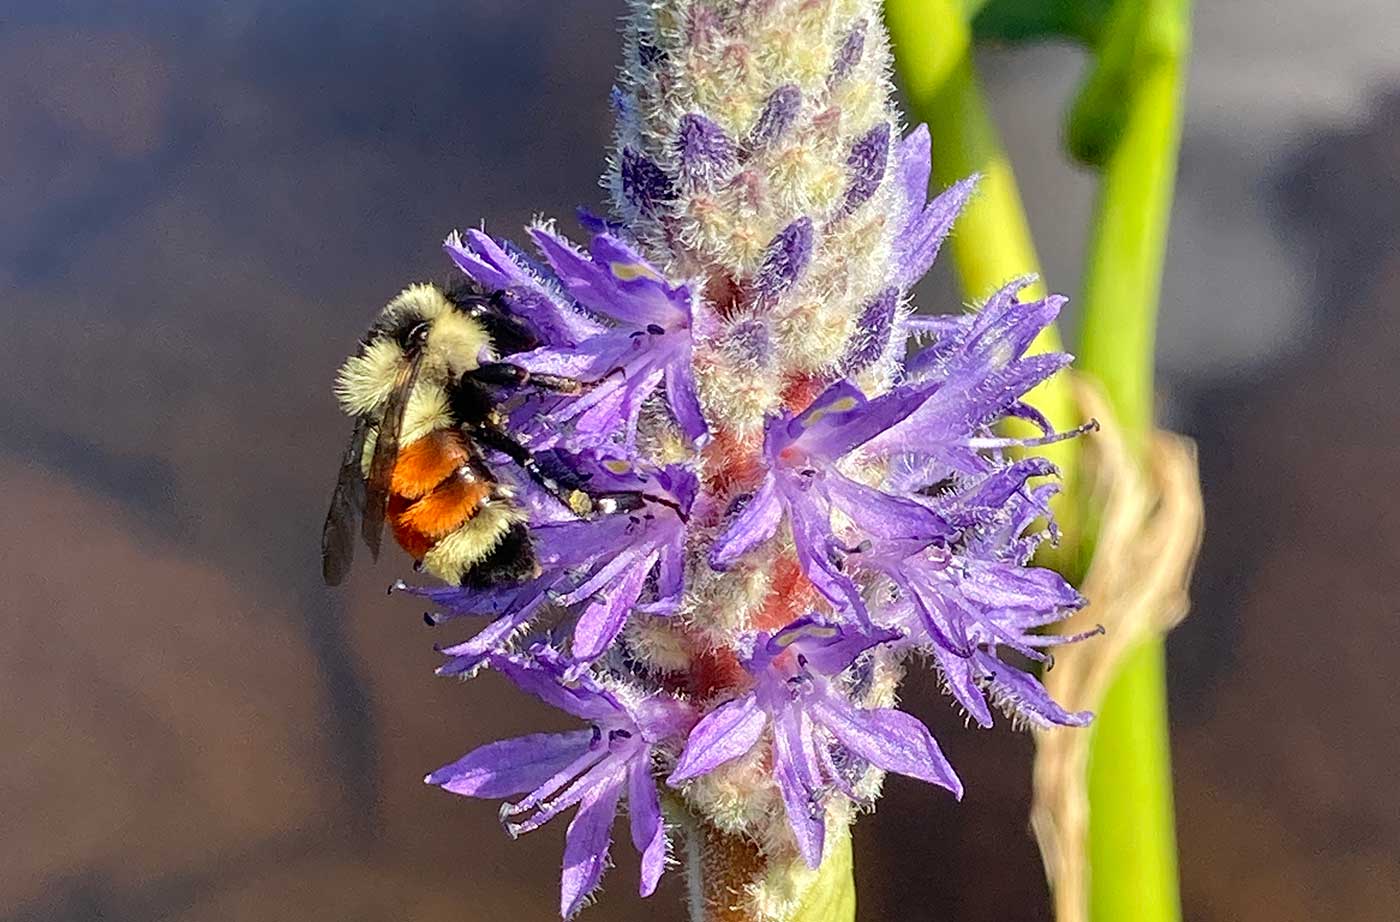 tri-colored bumble bee on flower